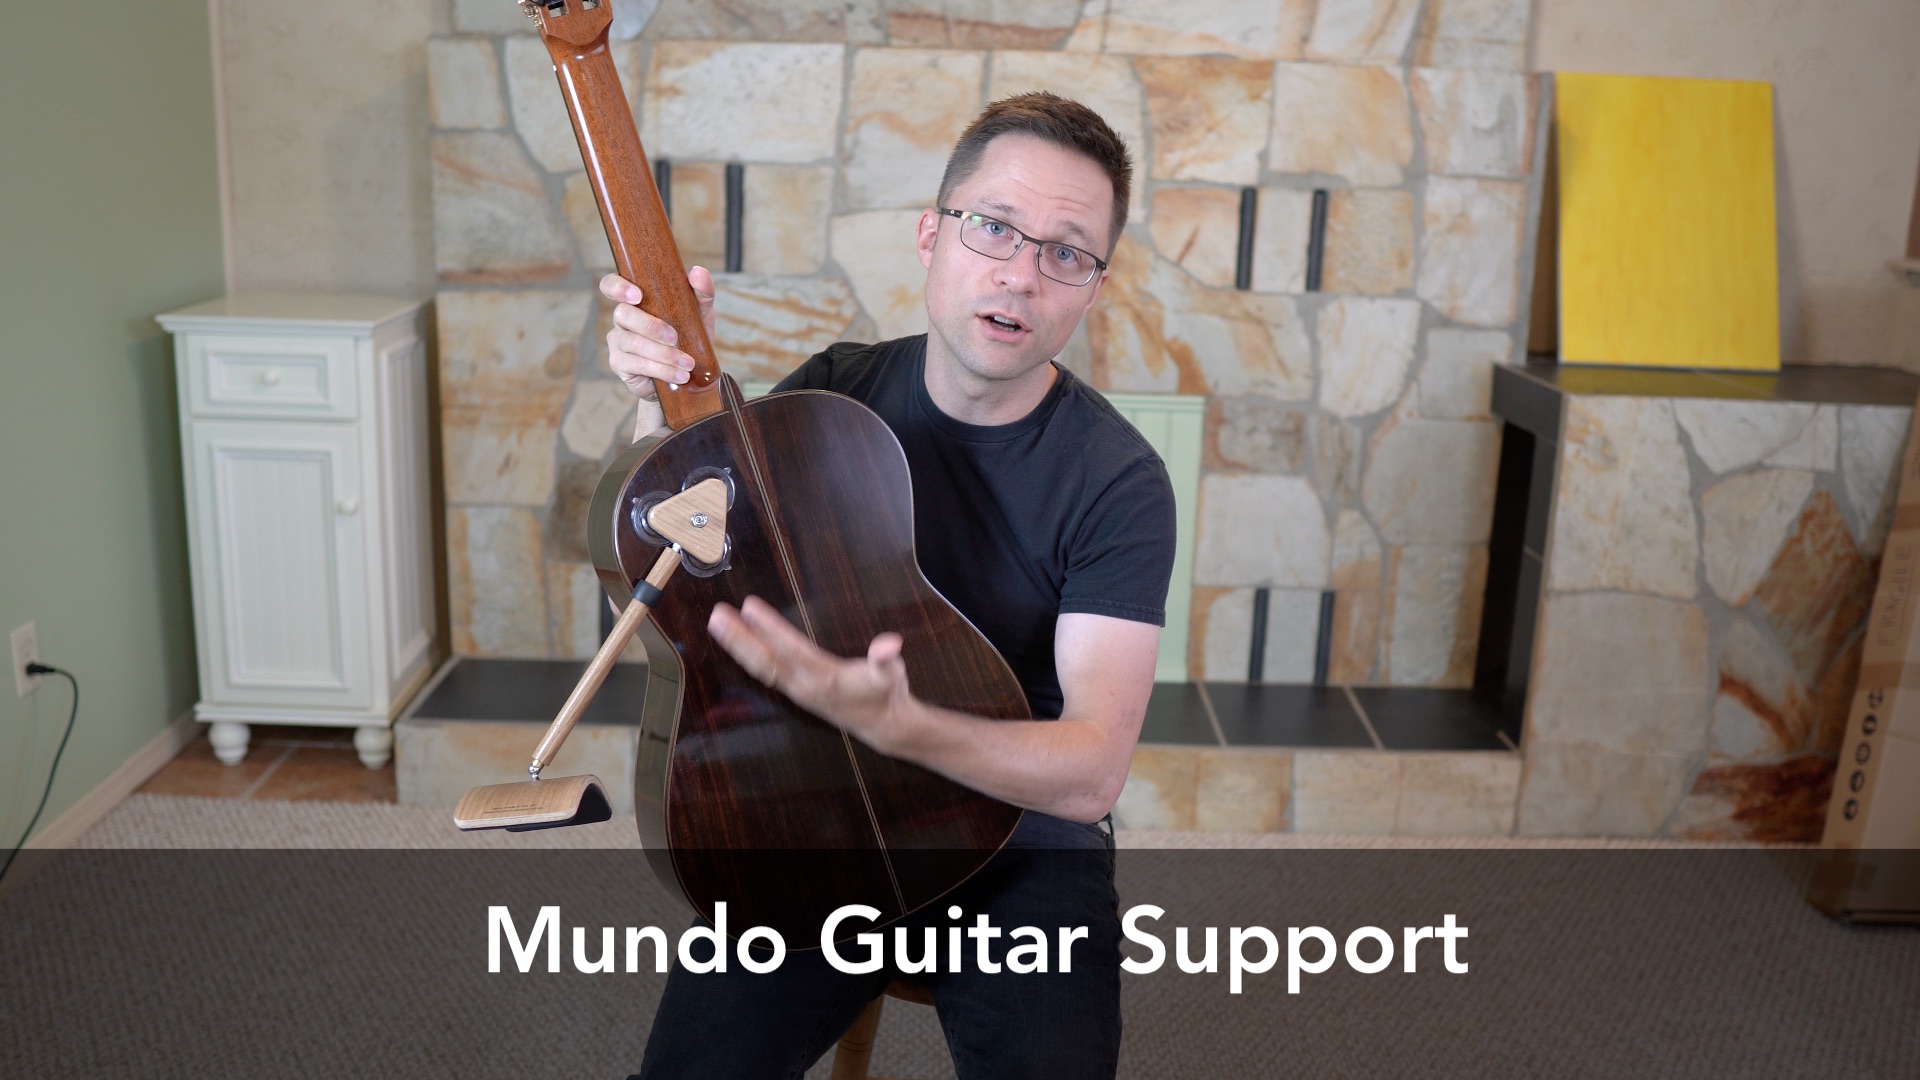 Mundo Guitar Support and Strap